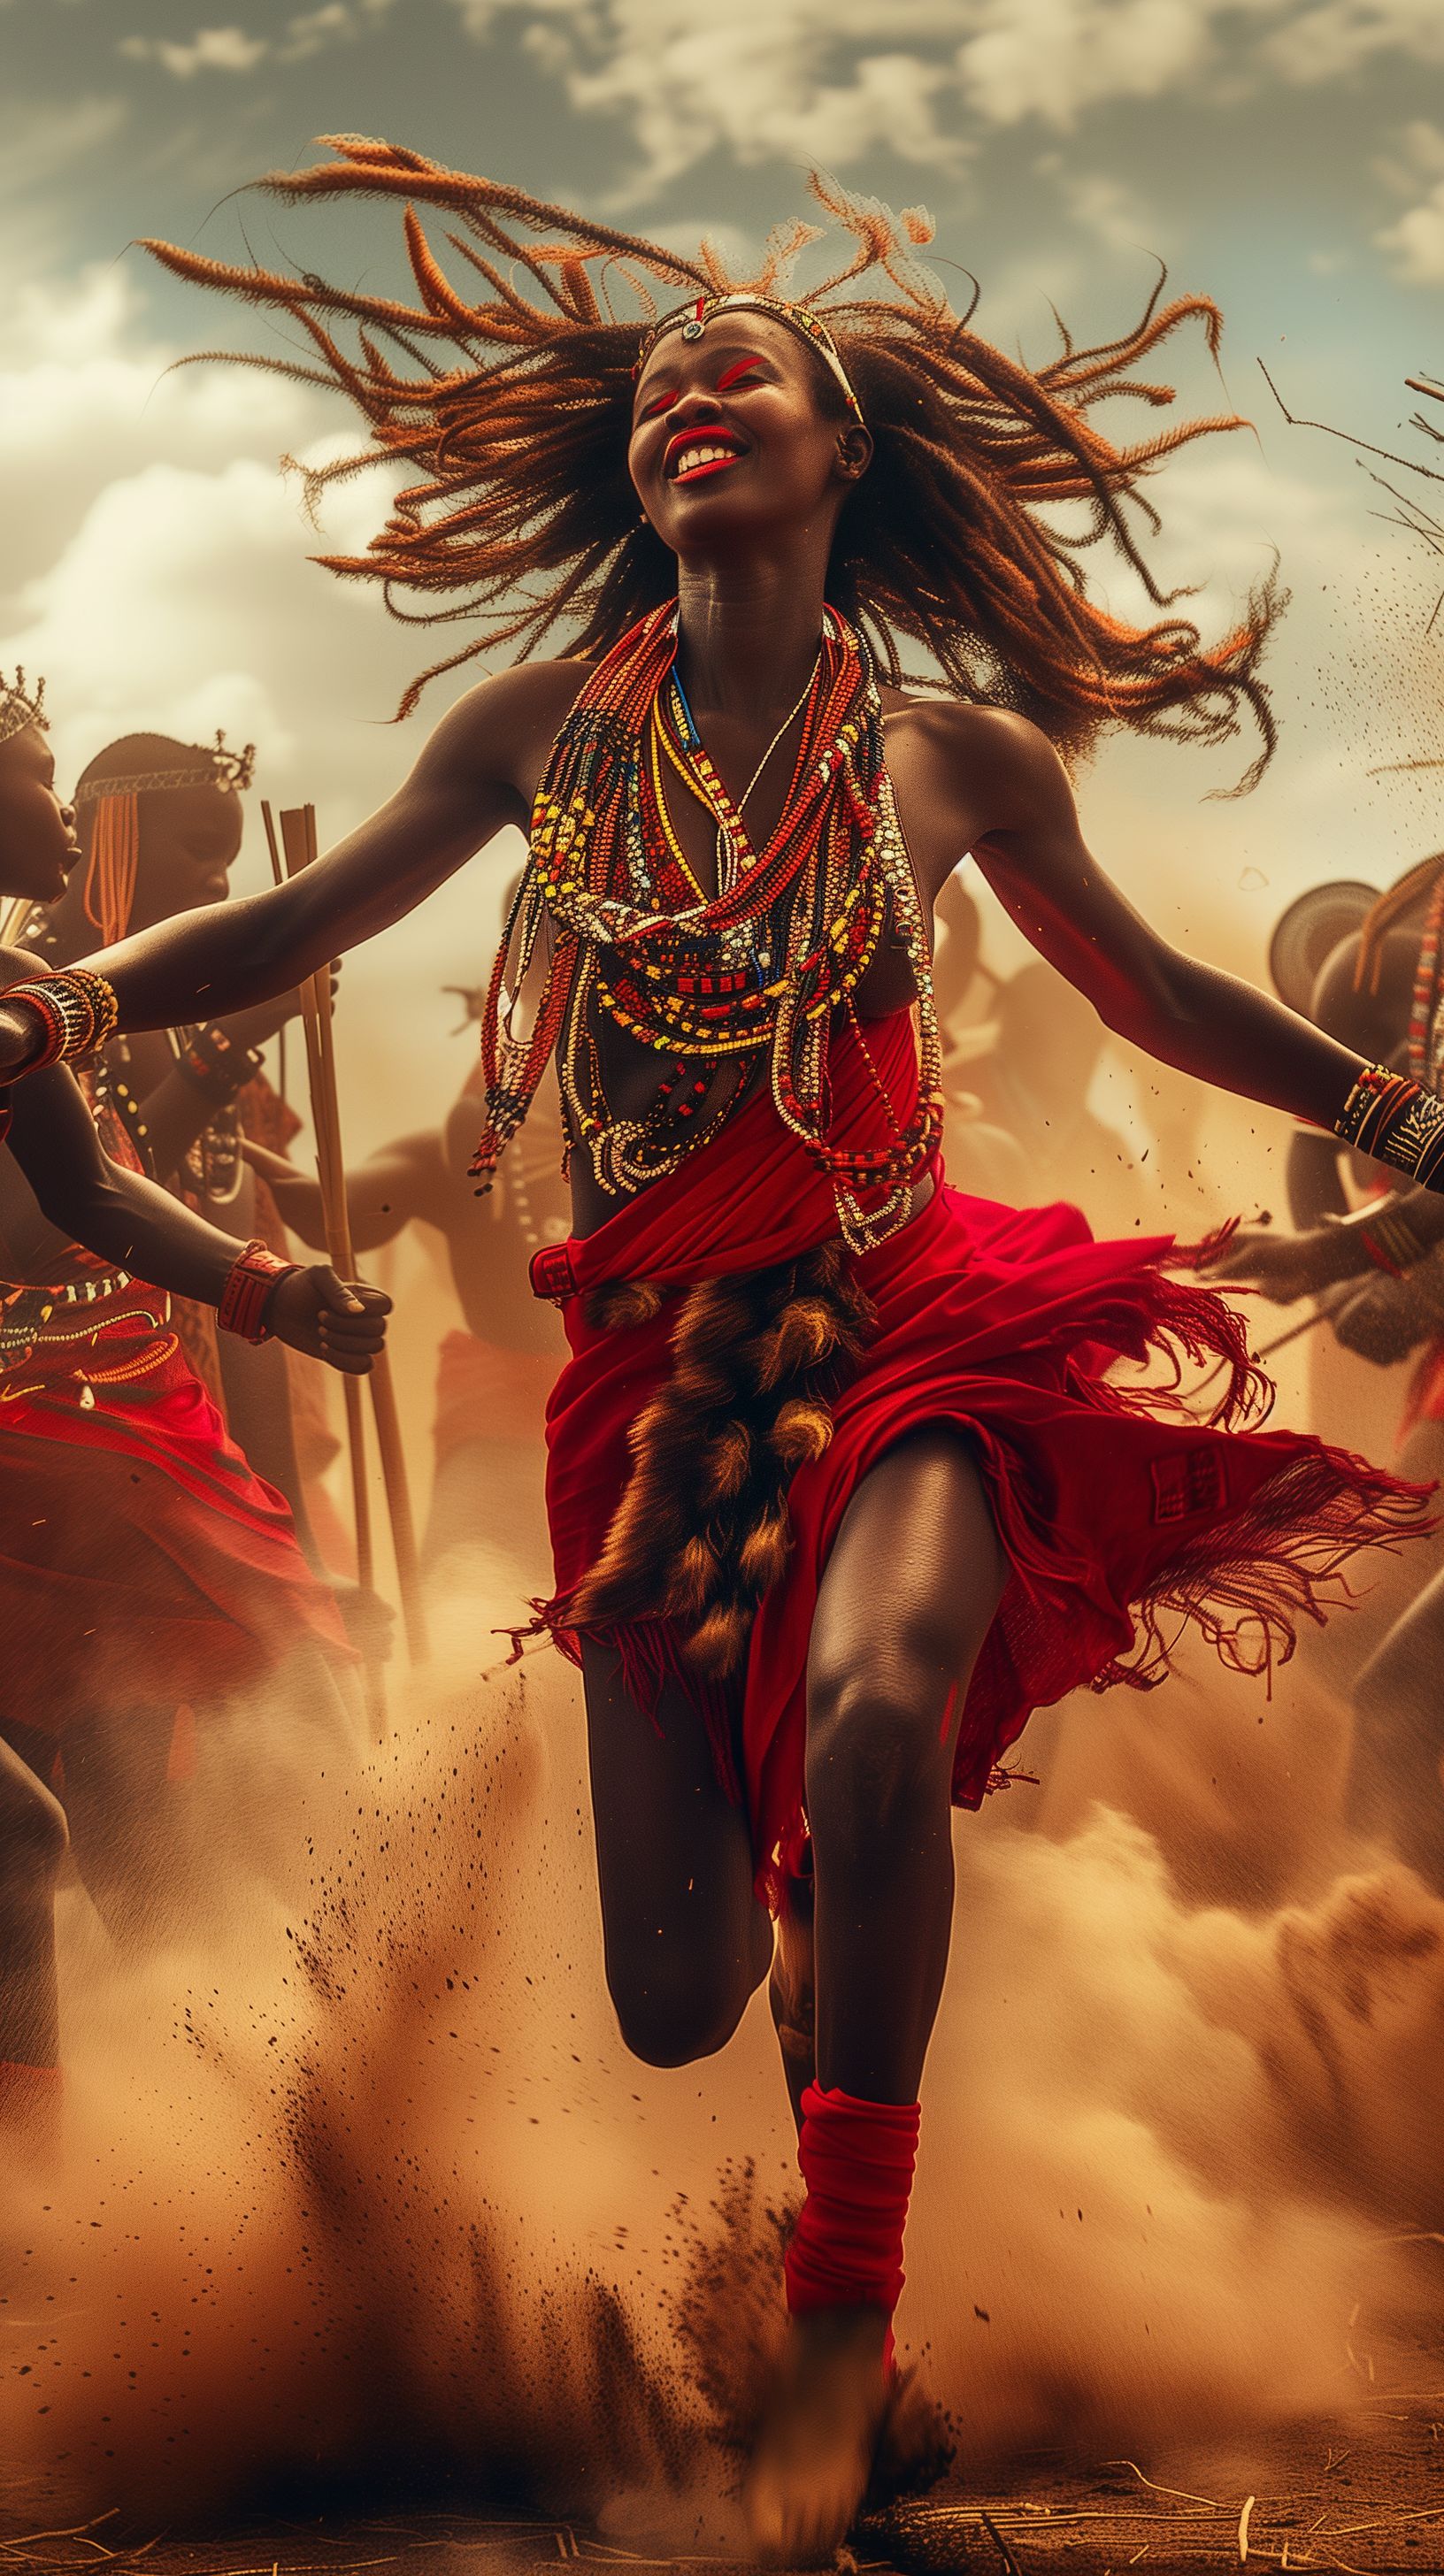 Prompt: attractive dark skin warrior women, tribe from africa, red cloth clothing with beads, peircing eyes, national geographic cover, joyful and dancing with reeds on there ankles, making a cloud of dust around them as they stamp hard on the ground --ar 9:16 --c 2 --v 6.0 